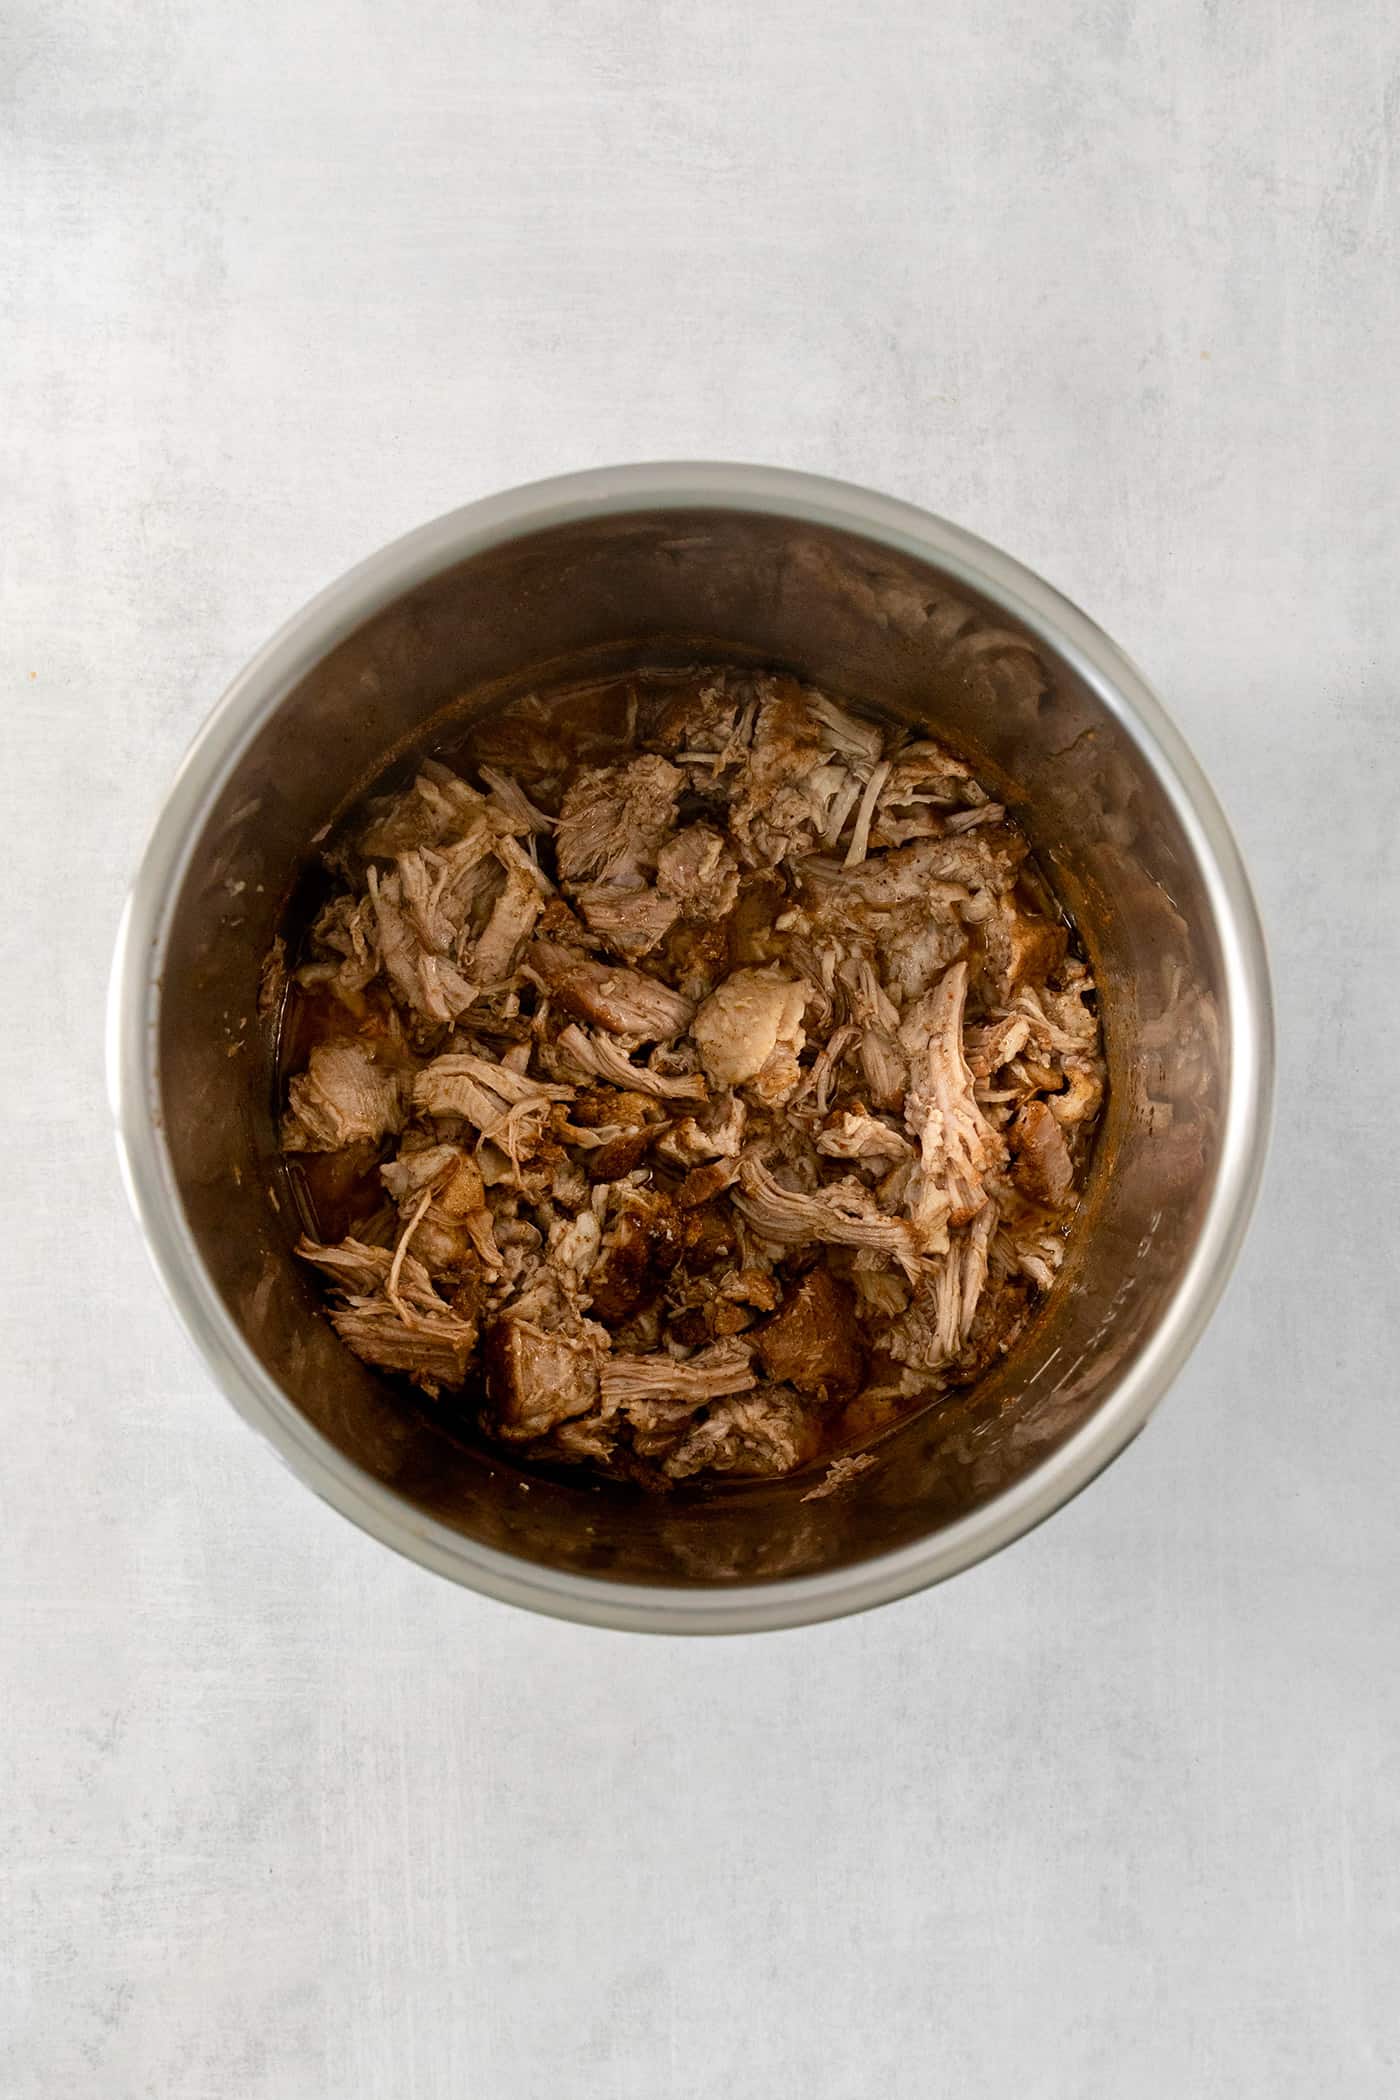 Pork is shown in an Instant Pot.